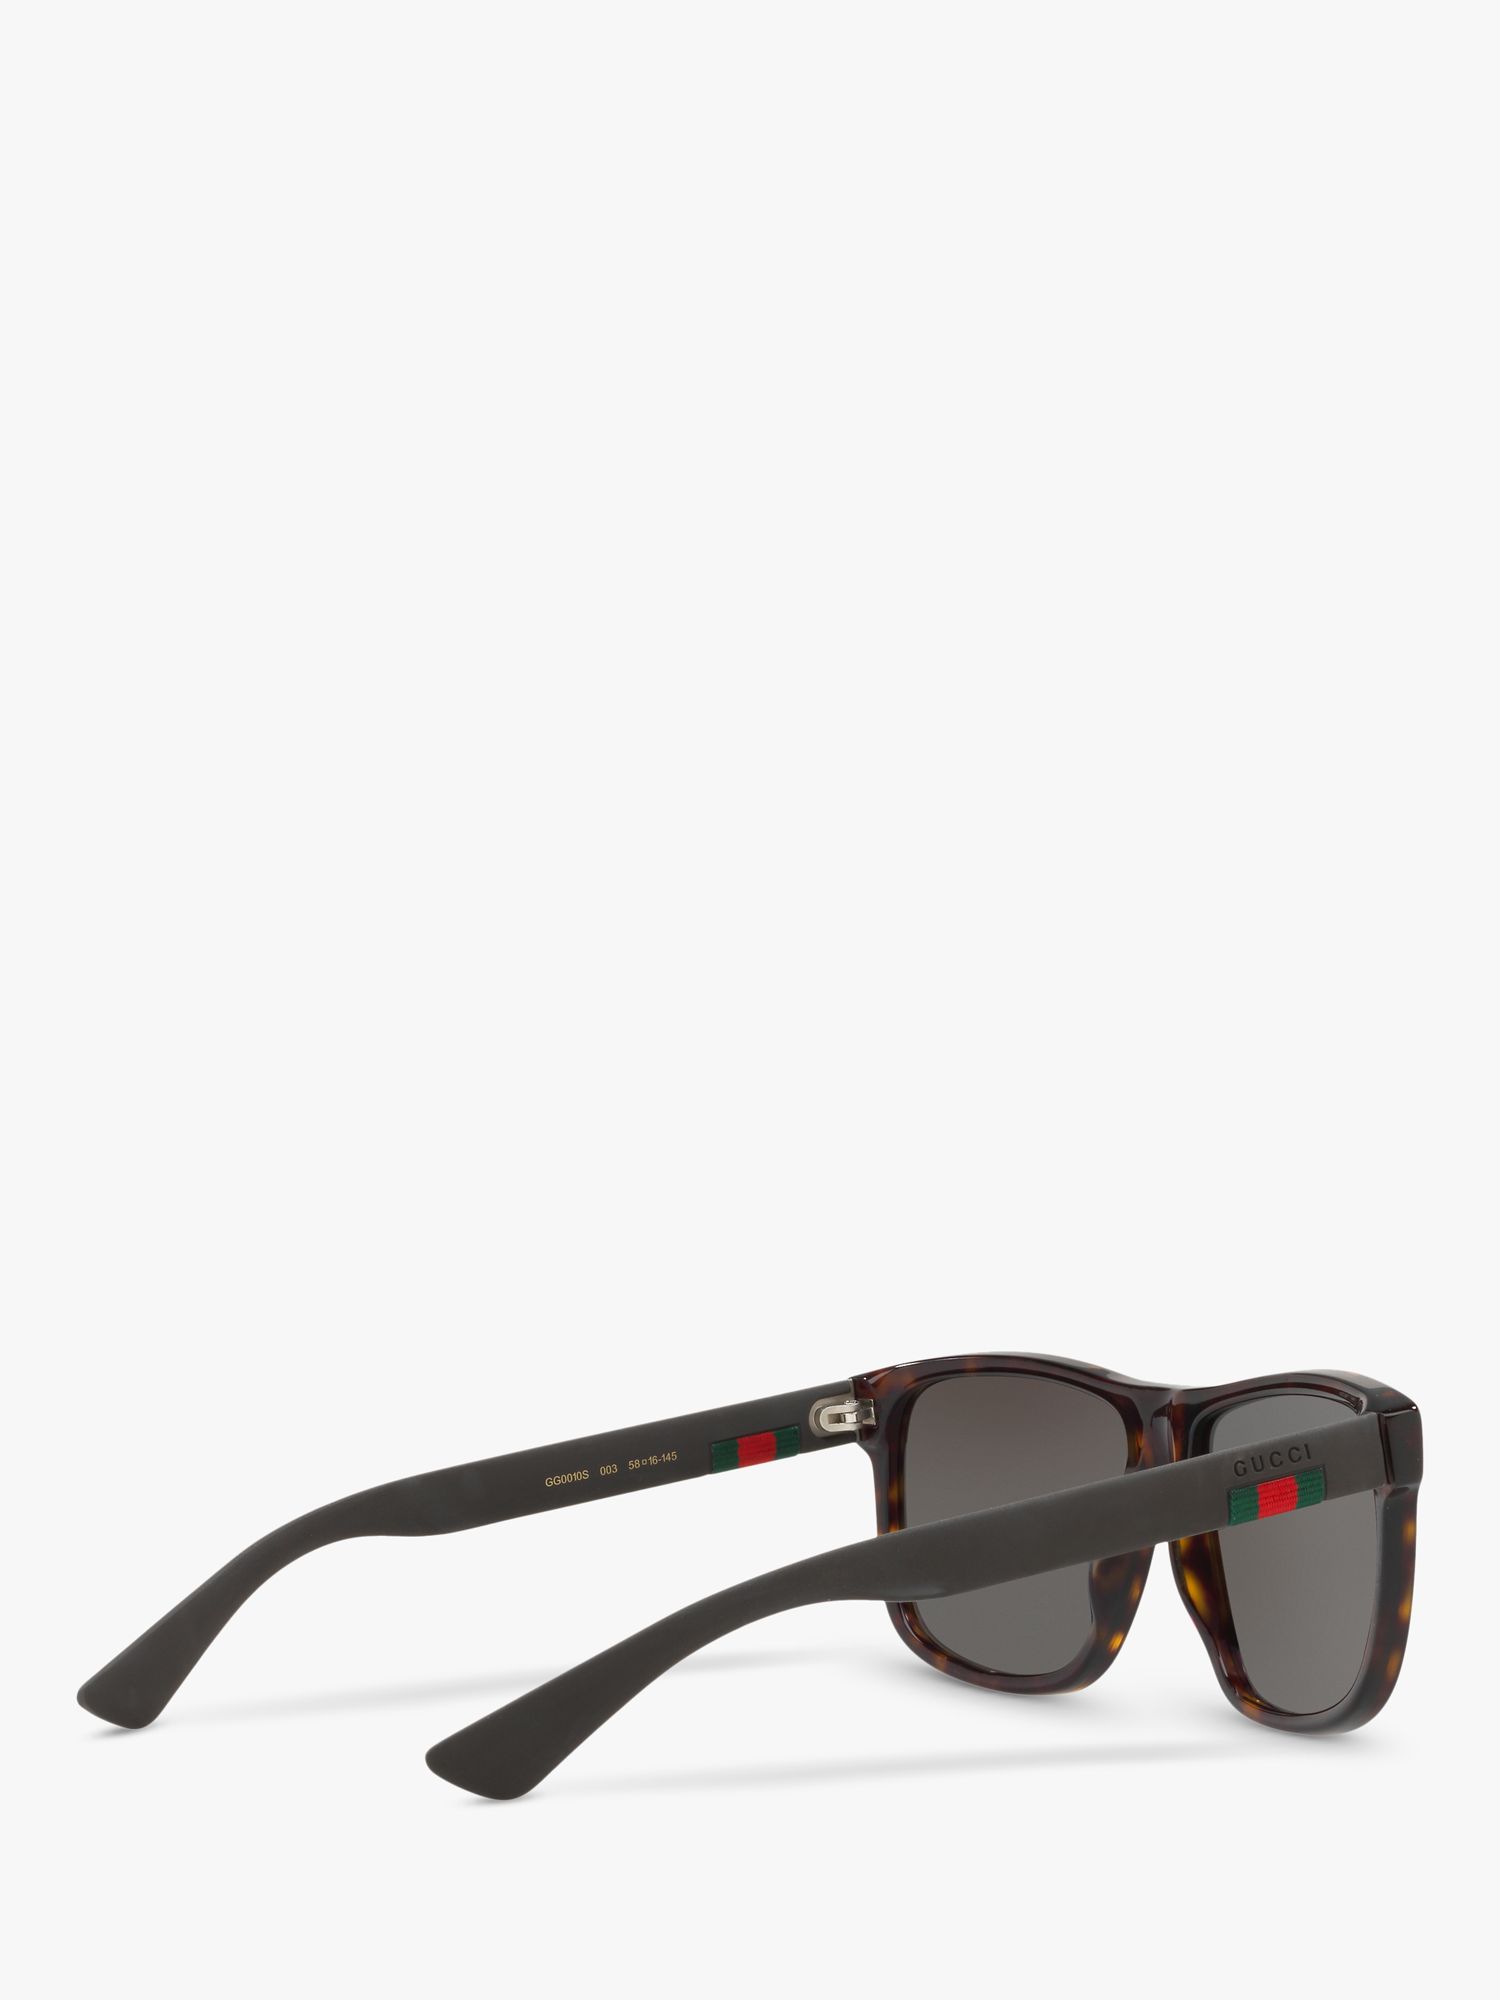 Buy Gucci GG0010S Polarised D-Frame Sunglasses Online at johnlewis.com